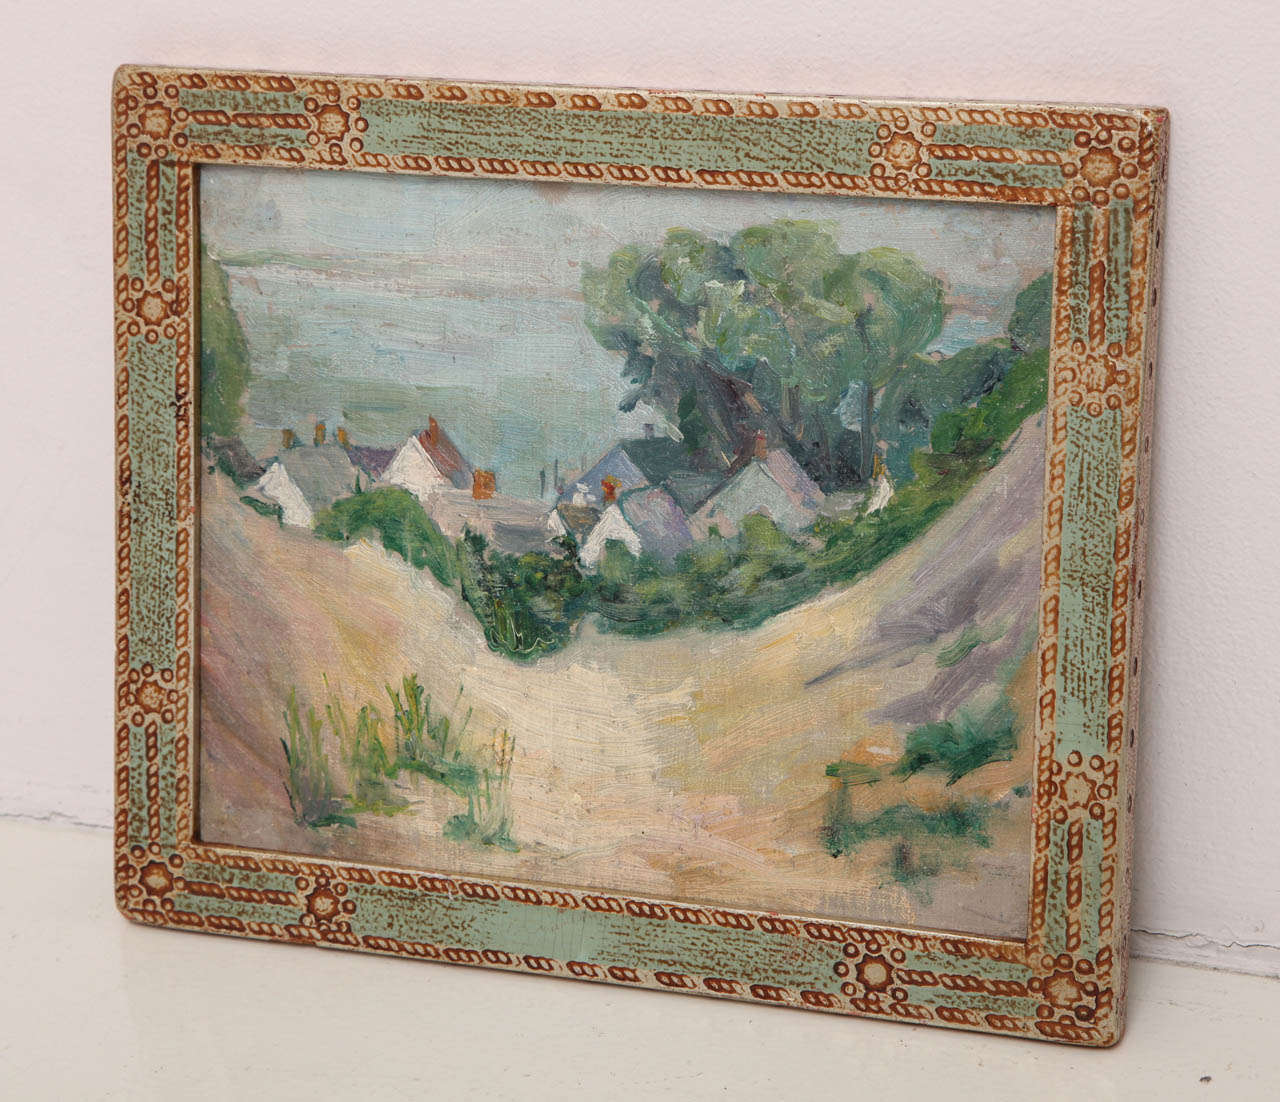 MAX KUEHNE (1880-1968)
View of Provincetown, MA
Oil on board in artist-made frame
Signed: Max Kuehne
American, c. 1930